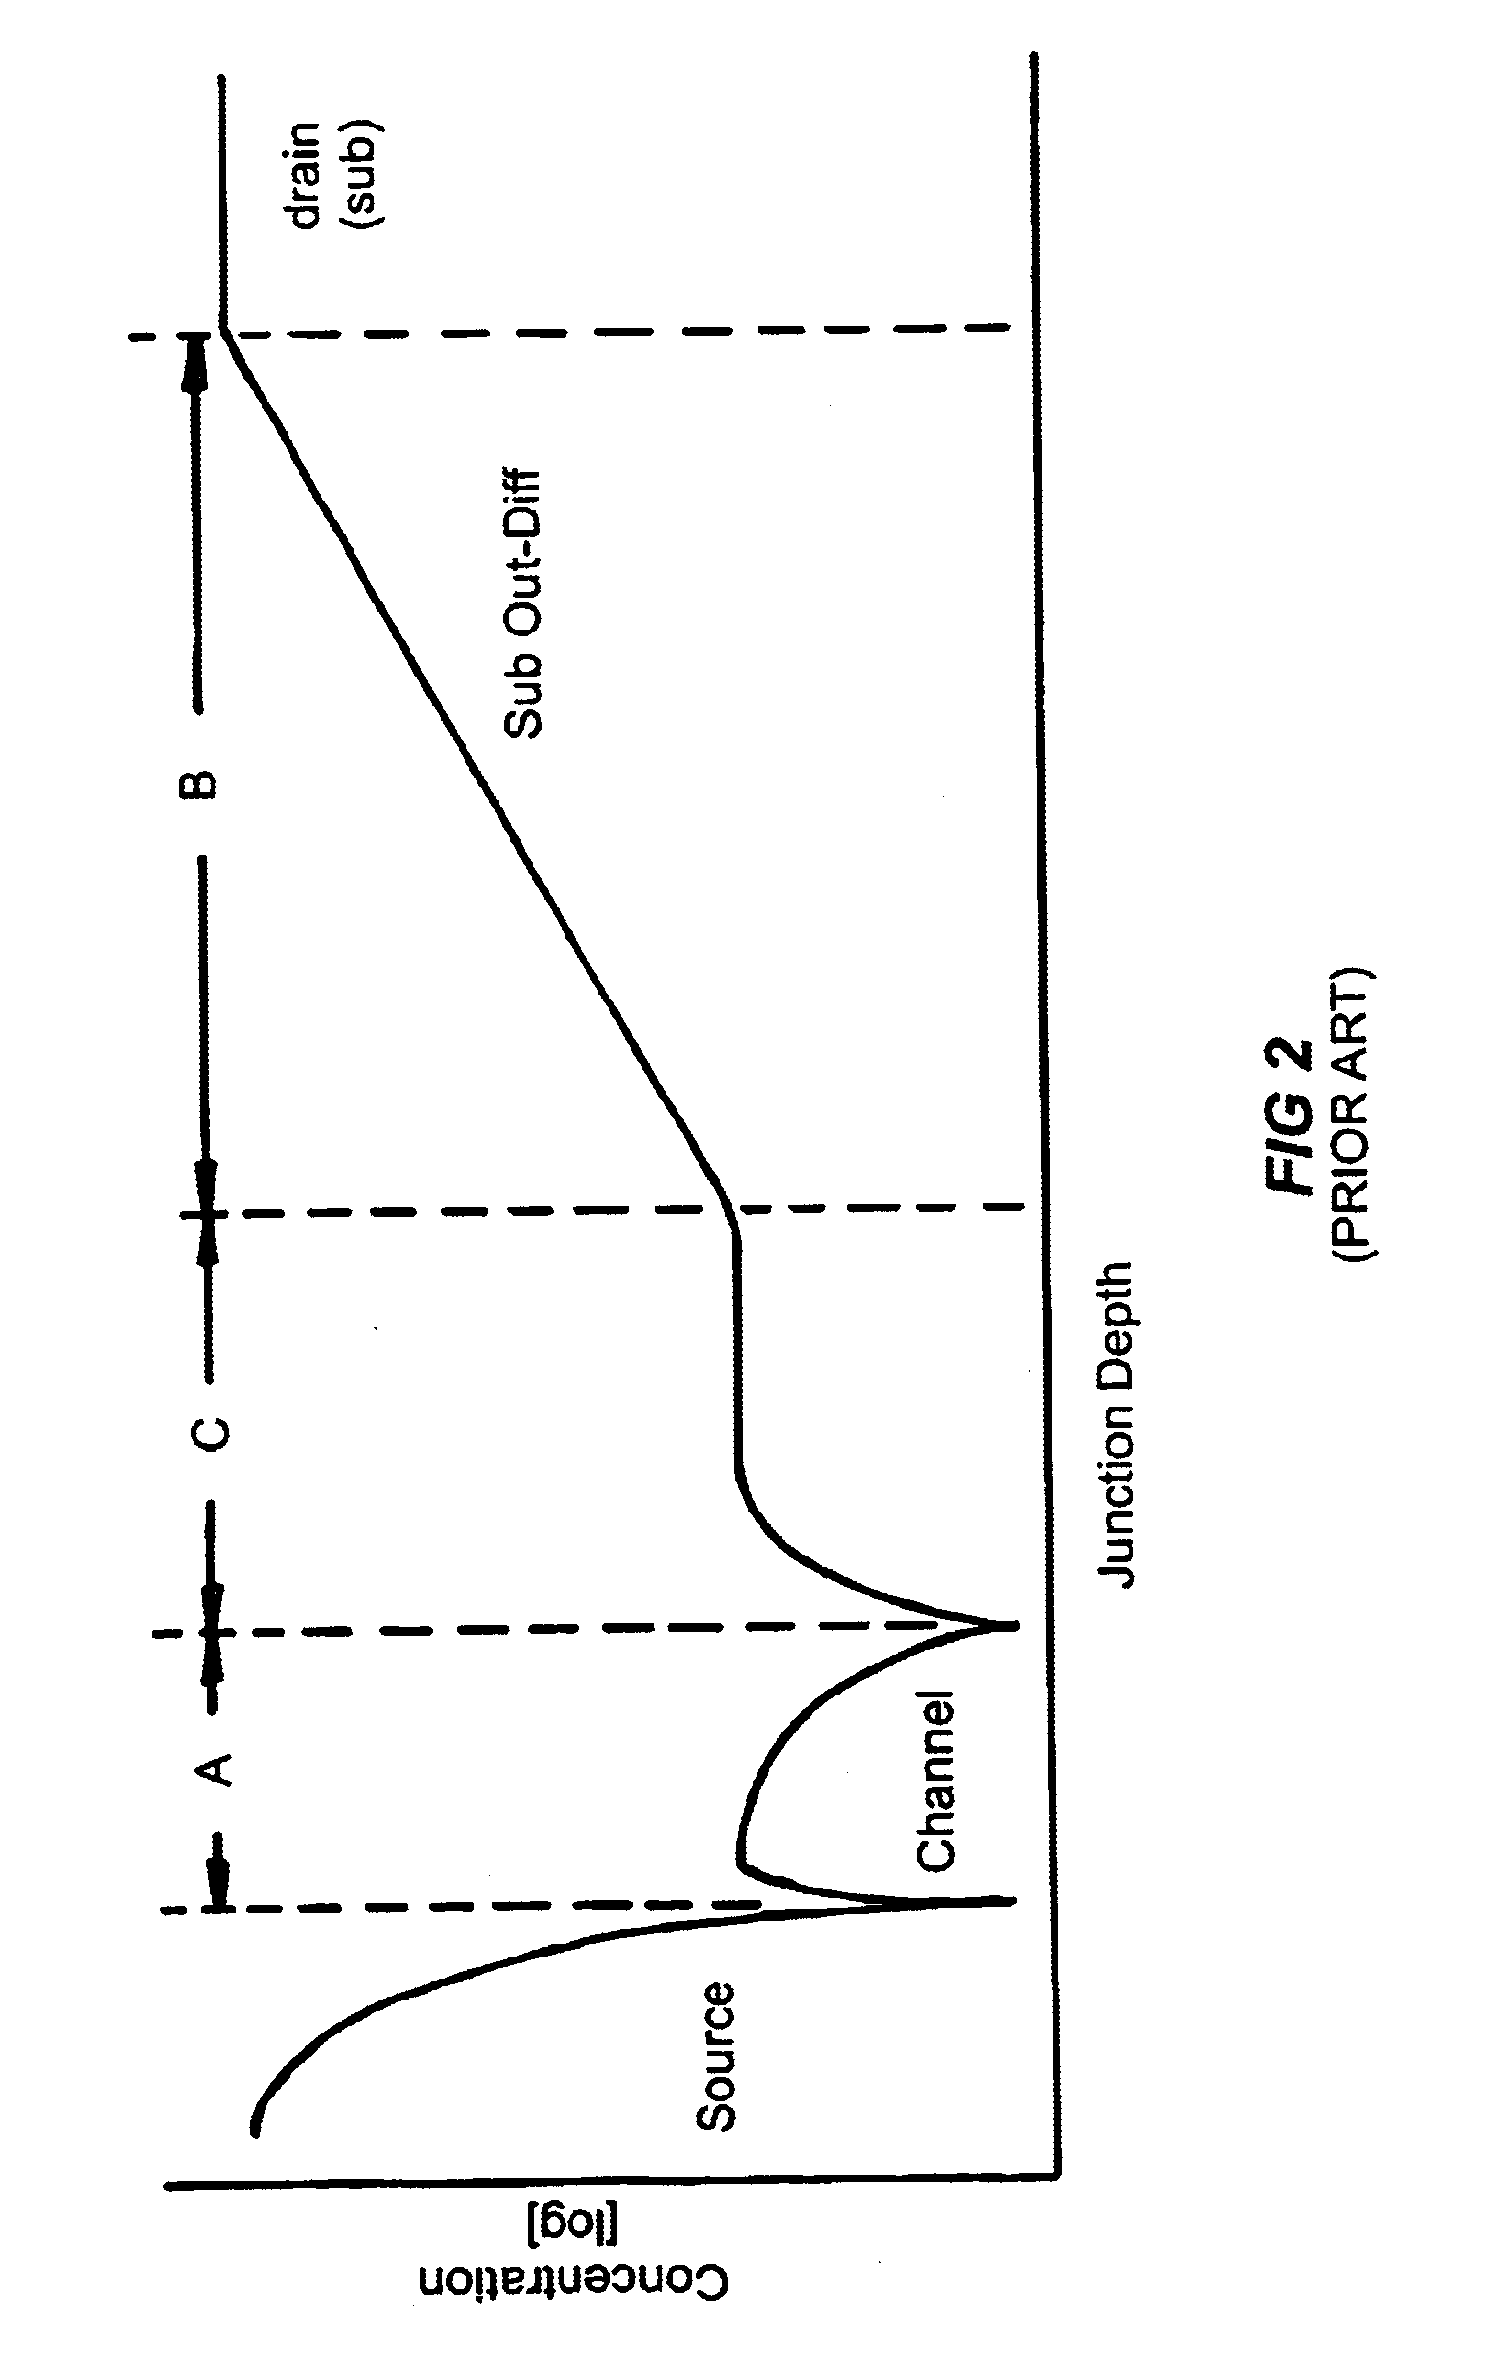 Vertical MOSFET with ultra-low resistance and low gate charge